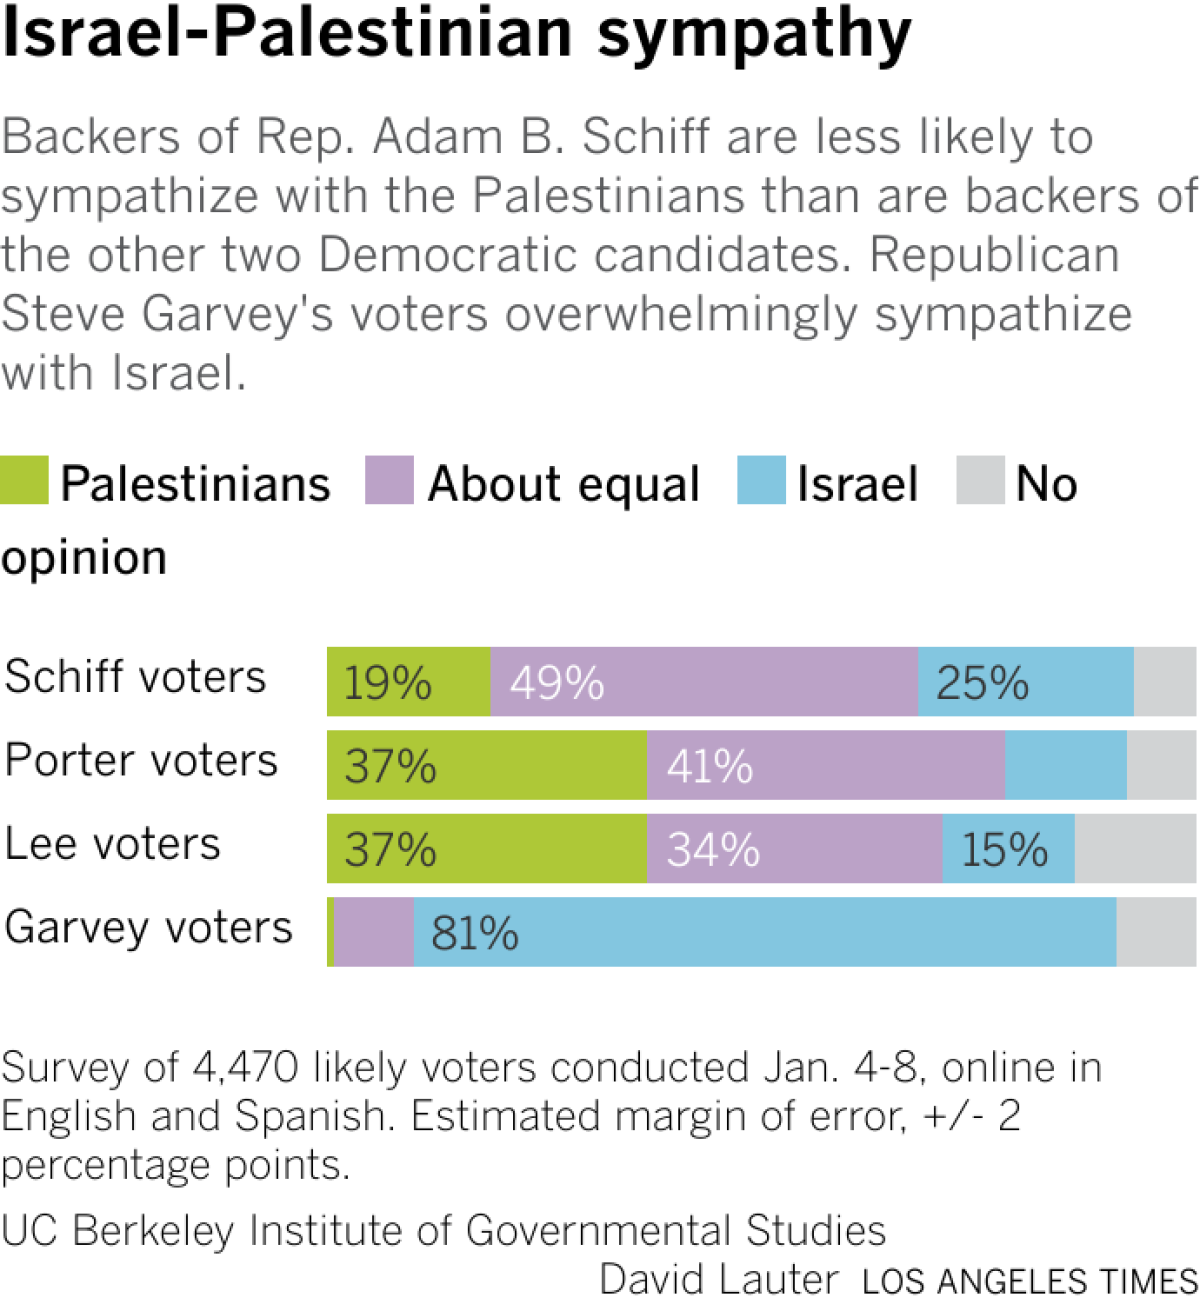 Backers of Rep. Adam B. Schiff are less likely to sympathize with the Palestinians than are backers of the other two Democratic candidates.  Republican Steve Garvey's voters overwhelmingly sympathize with Israel.